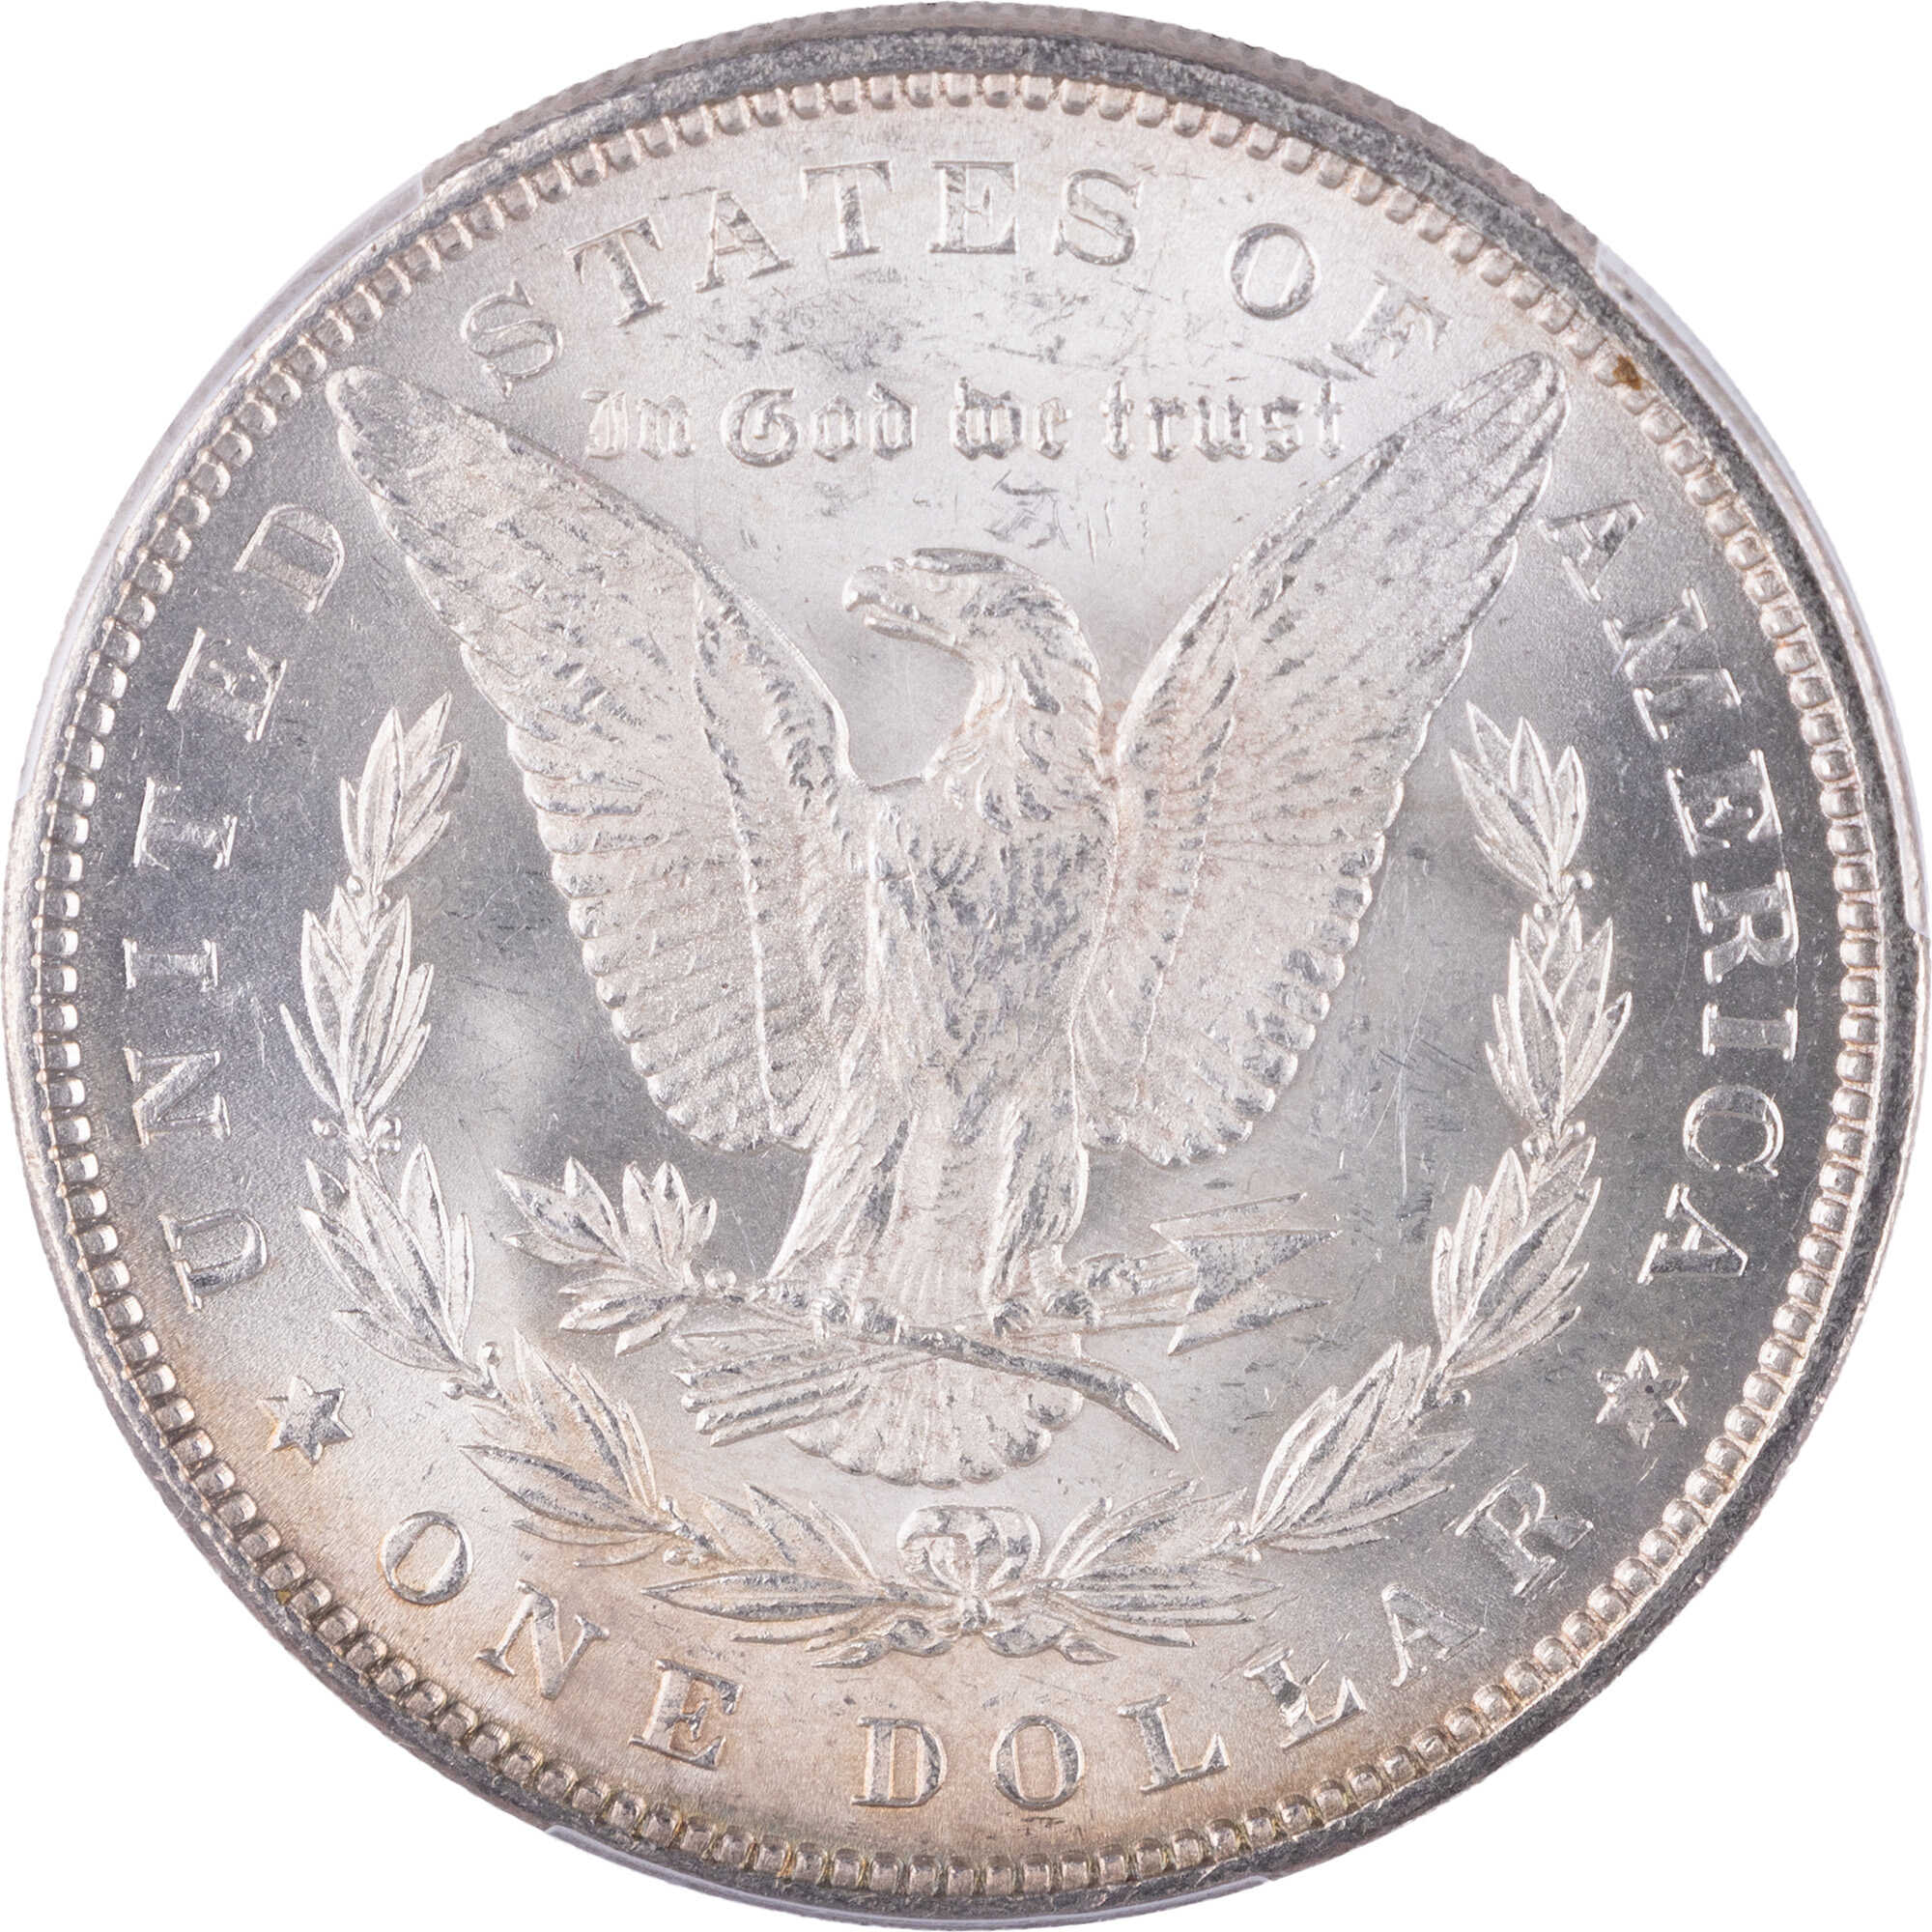 1883 Morgan Dollar MS 64 PCGS Silver $1 Uncirculated Coin SKU:I12860 - Morgan coin - Morgan silver dollar - Morgan silver dollar for sale - Profile Coins &amp; Collectibles